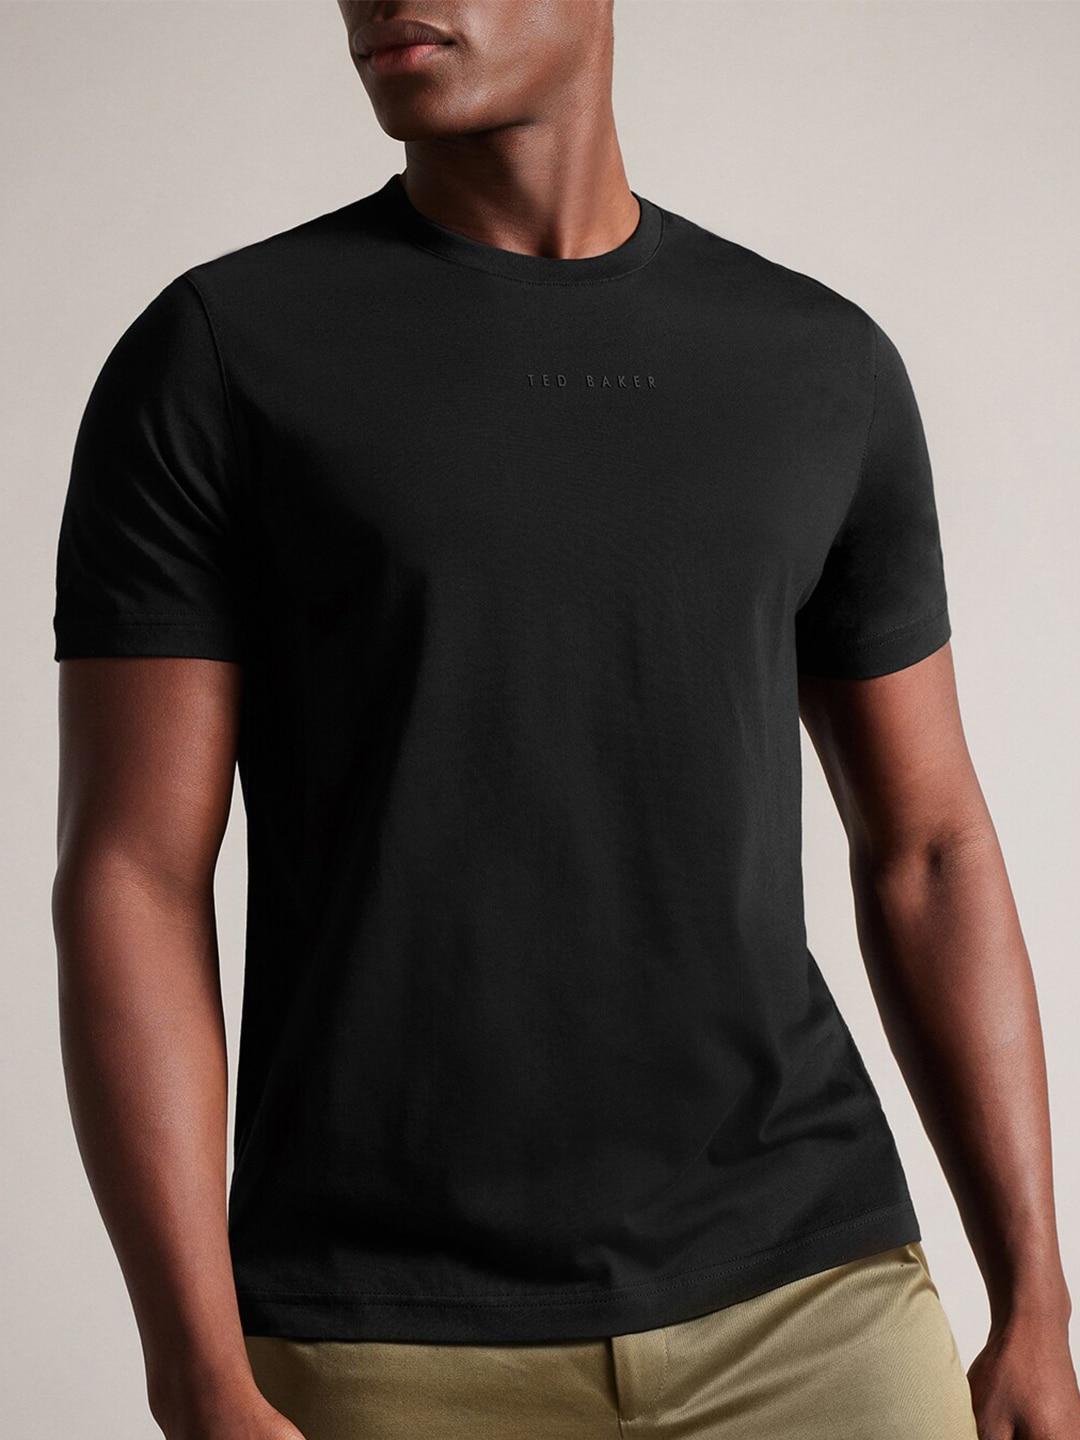 ted baker round neck cotton t-shirt